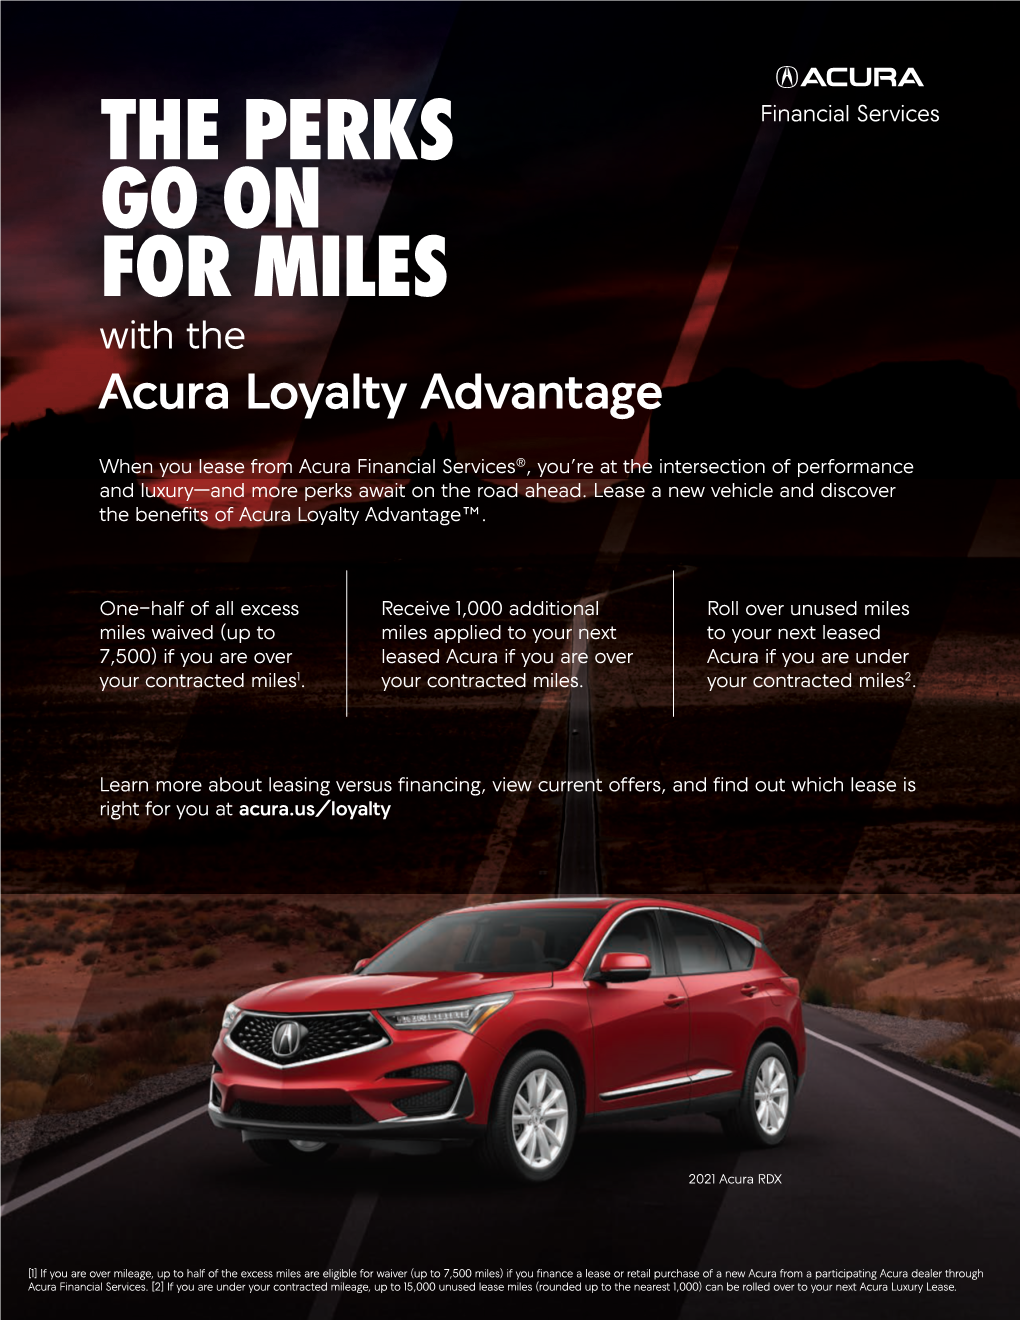 THE PERKS GO on for MILES with the Acura Loyalty Advantage